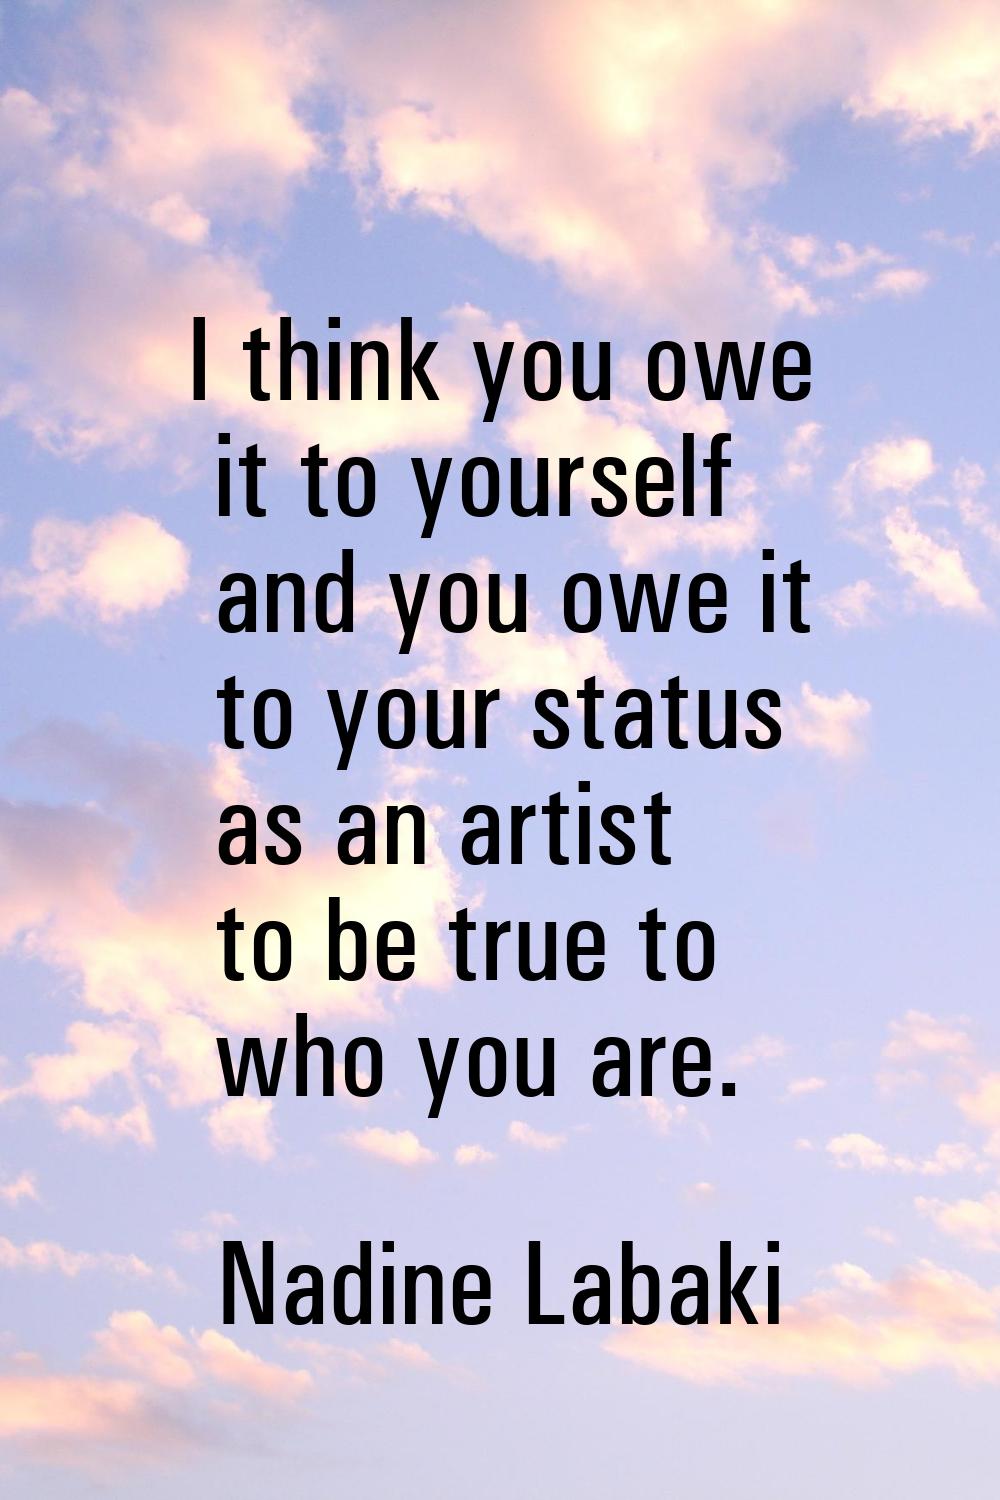 I think you owe it to yourself and you owe it to your status as an artist to be true to who you are